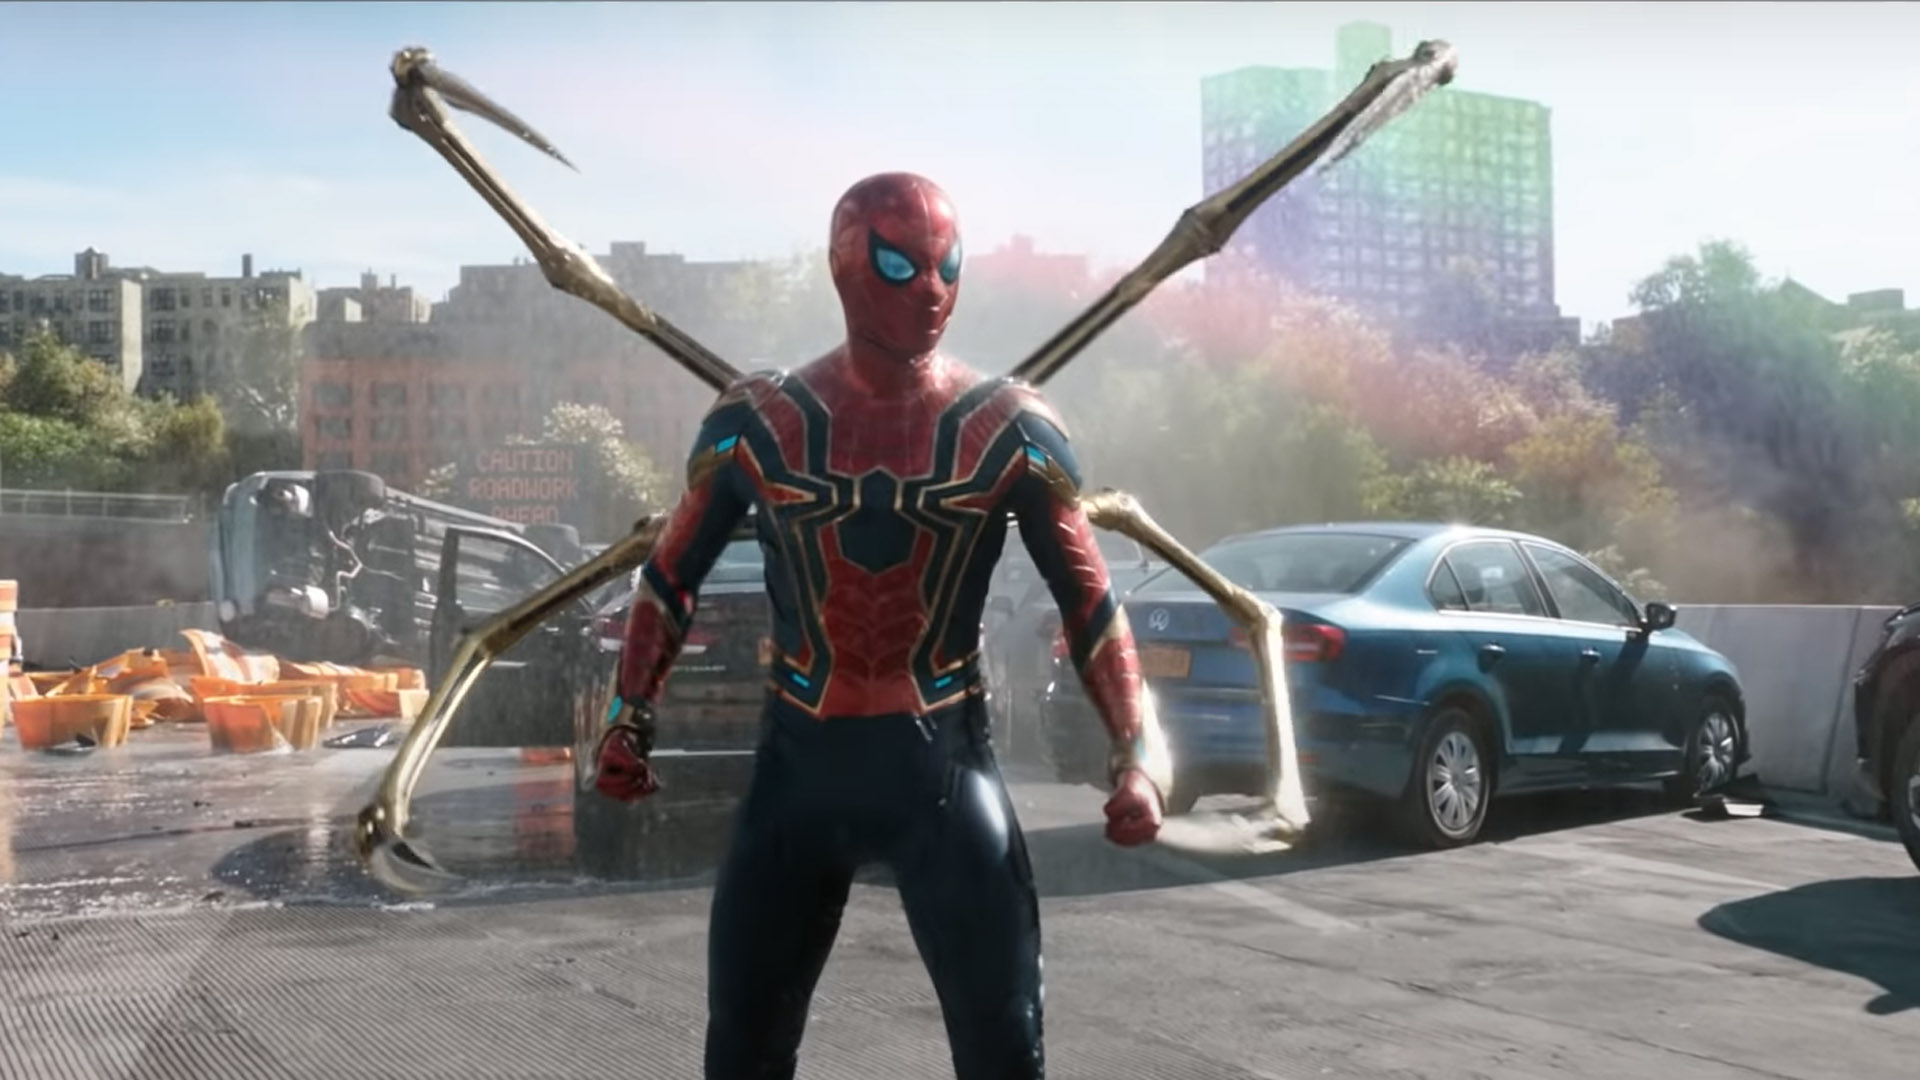 It's Time For Spider Man: No Way Home's Next Trailer To Be Released